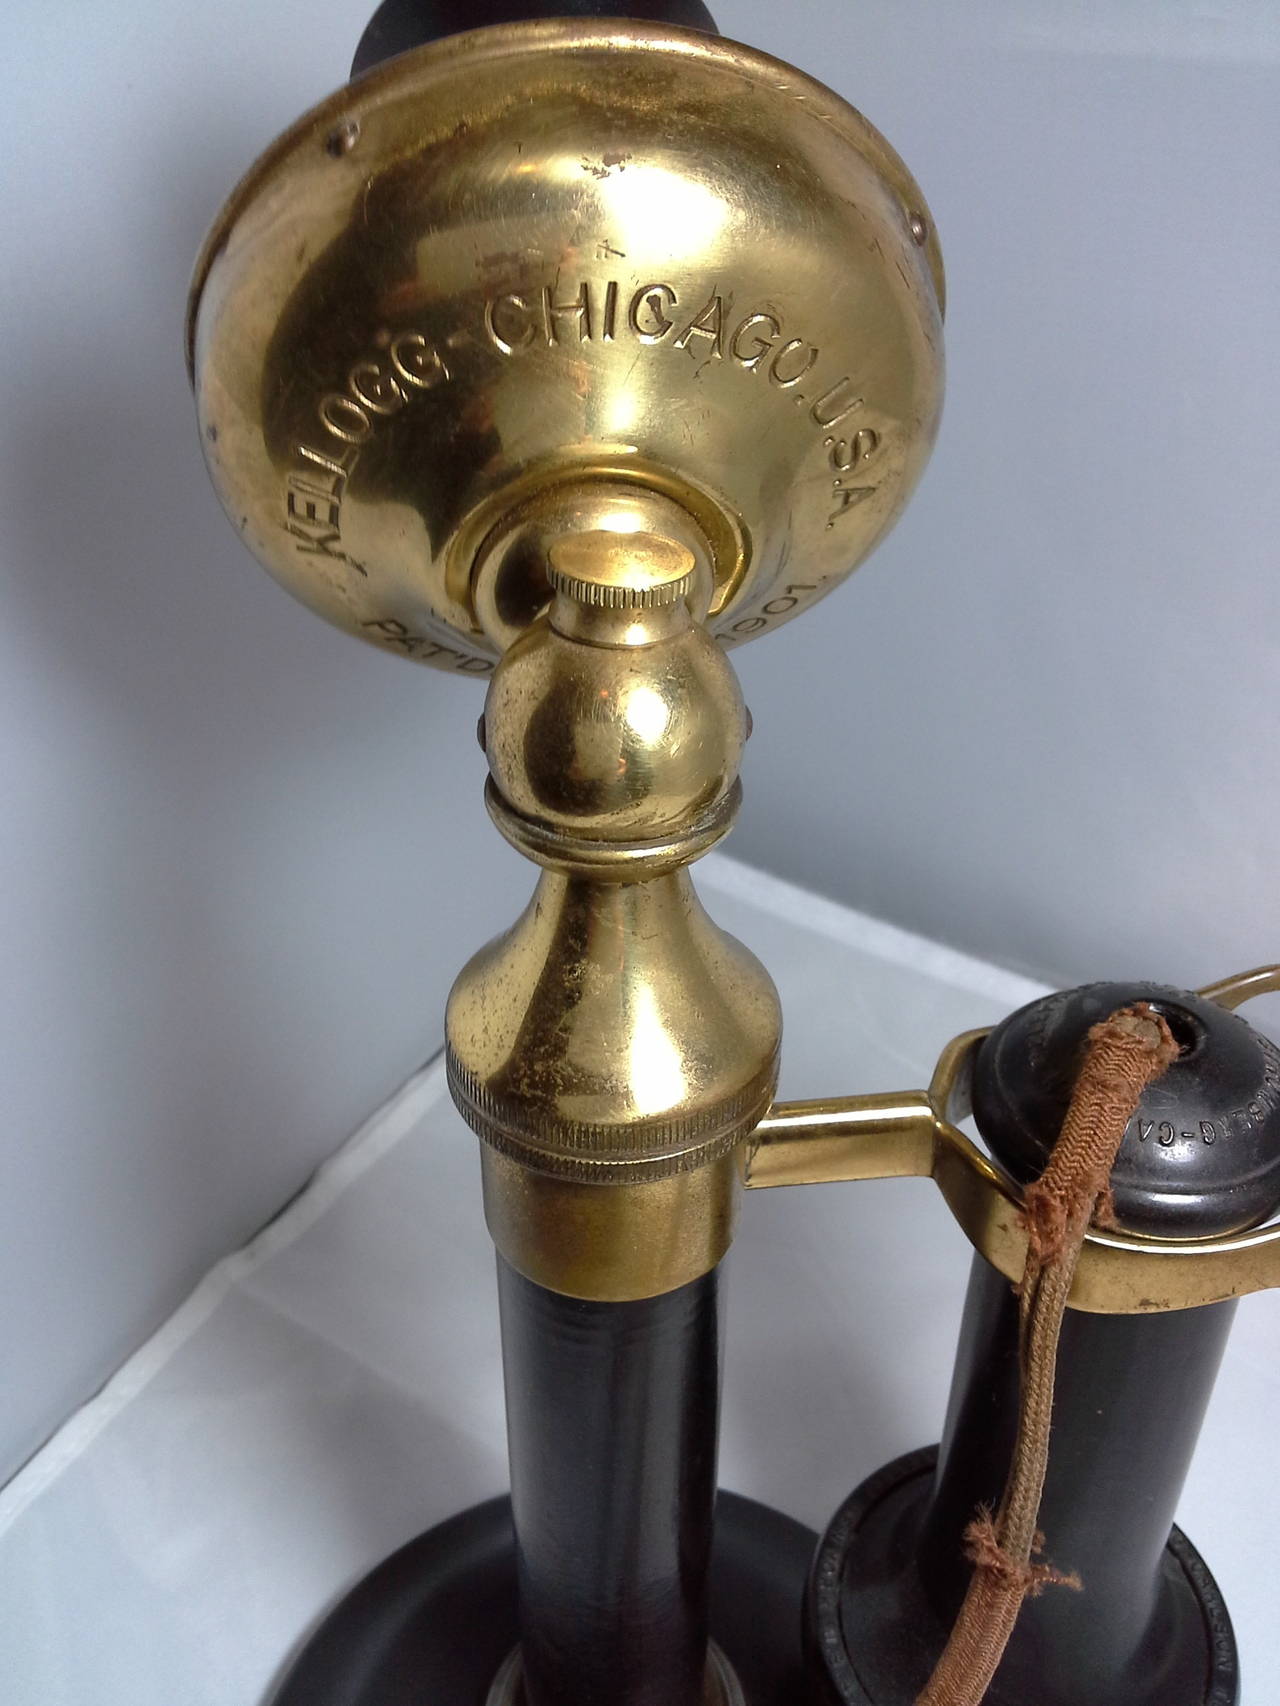 Early 20th Century Kellogg Chicago Candlestick Brass and Bakelite, Patented 1901